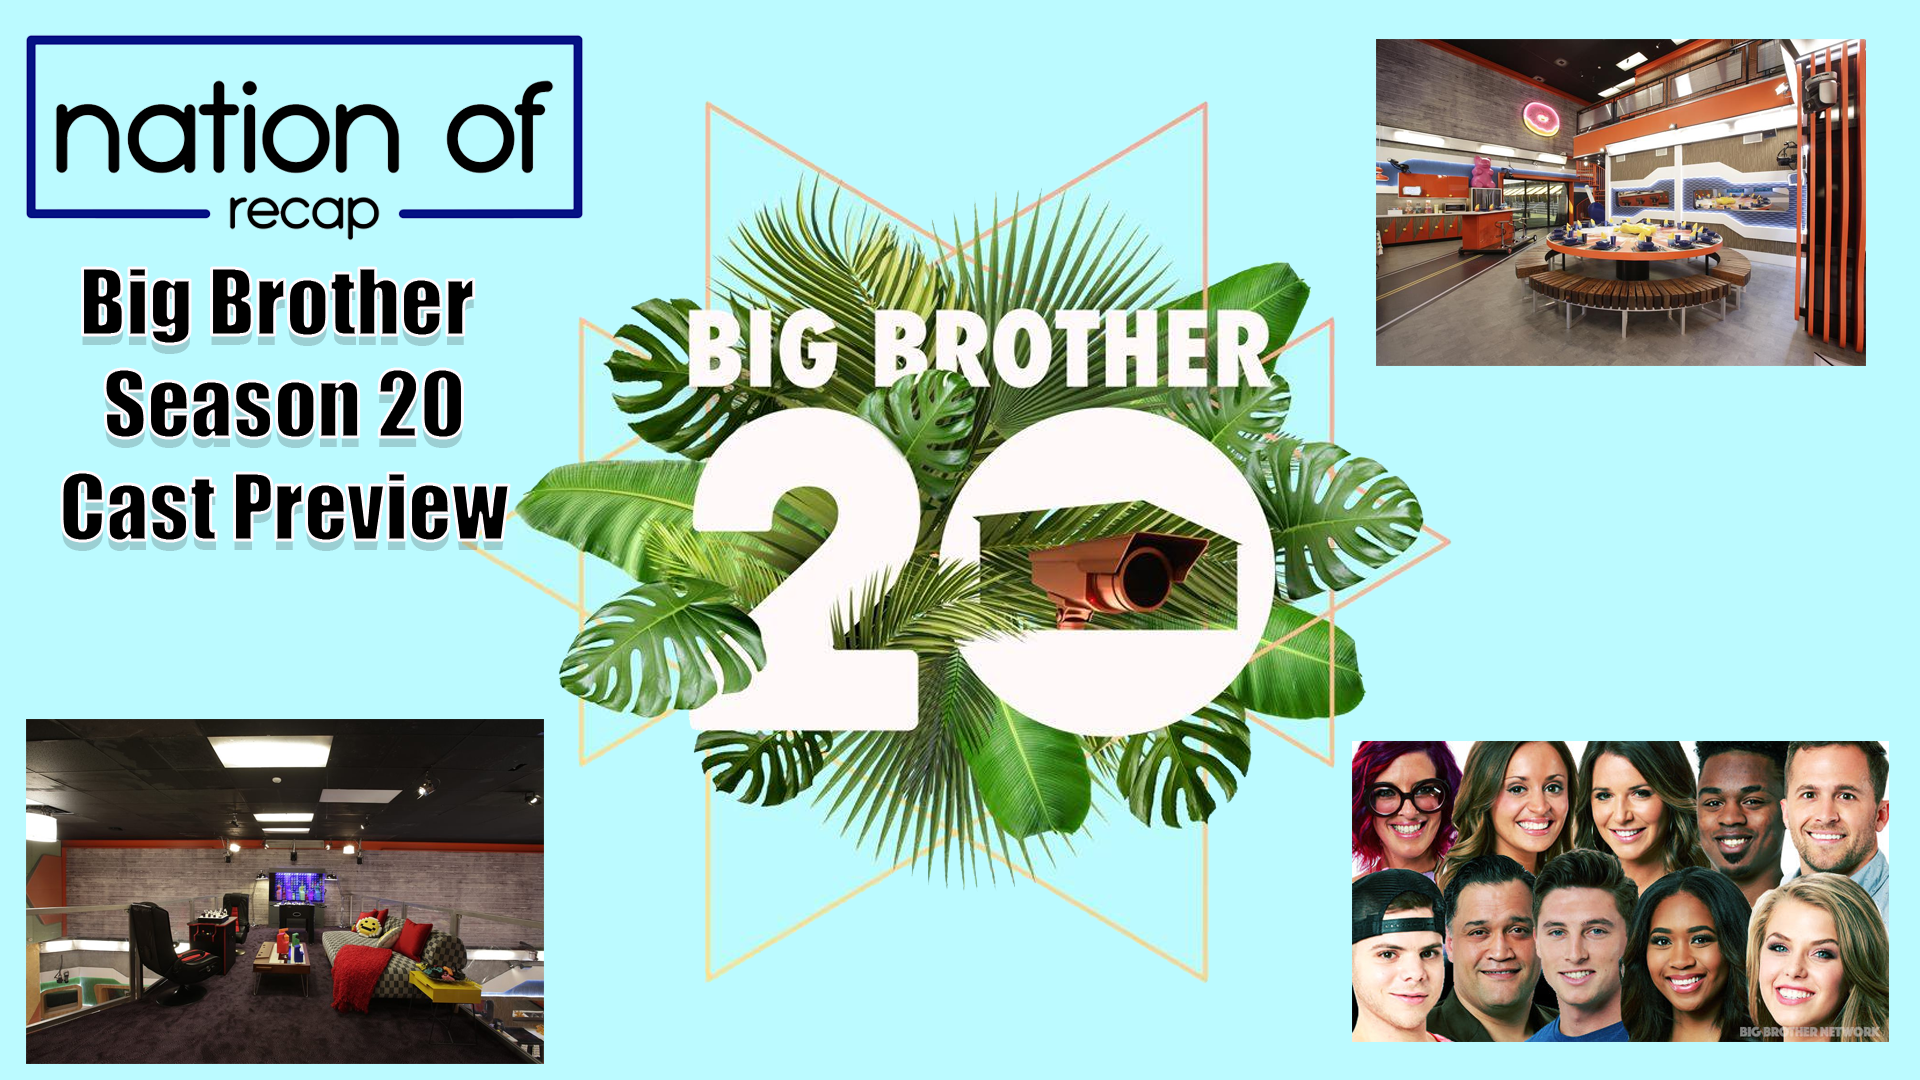 Big Brother 20 Preview